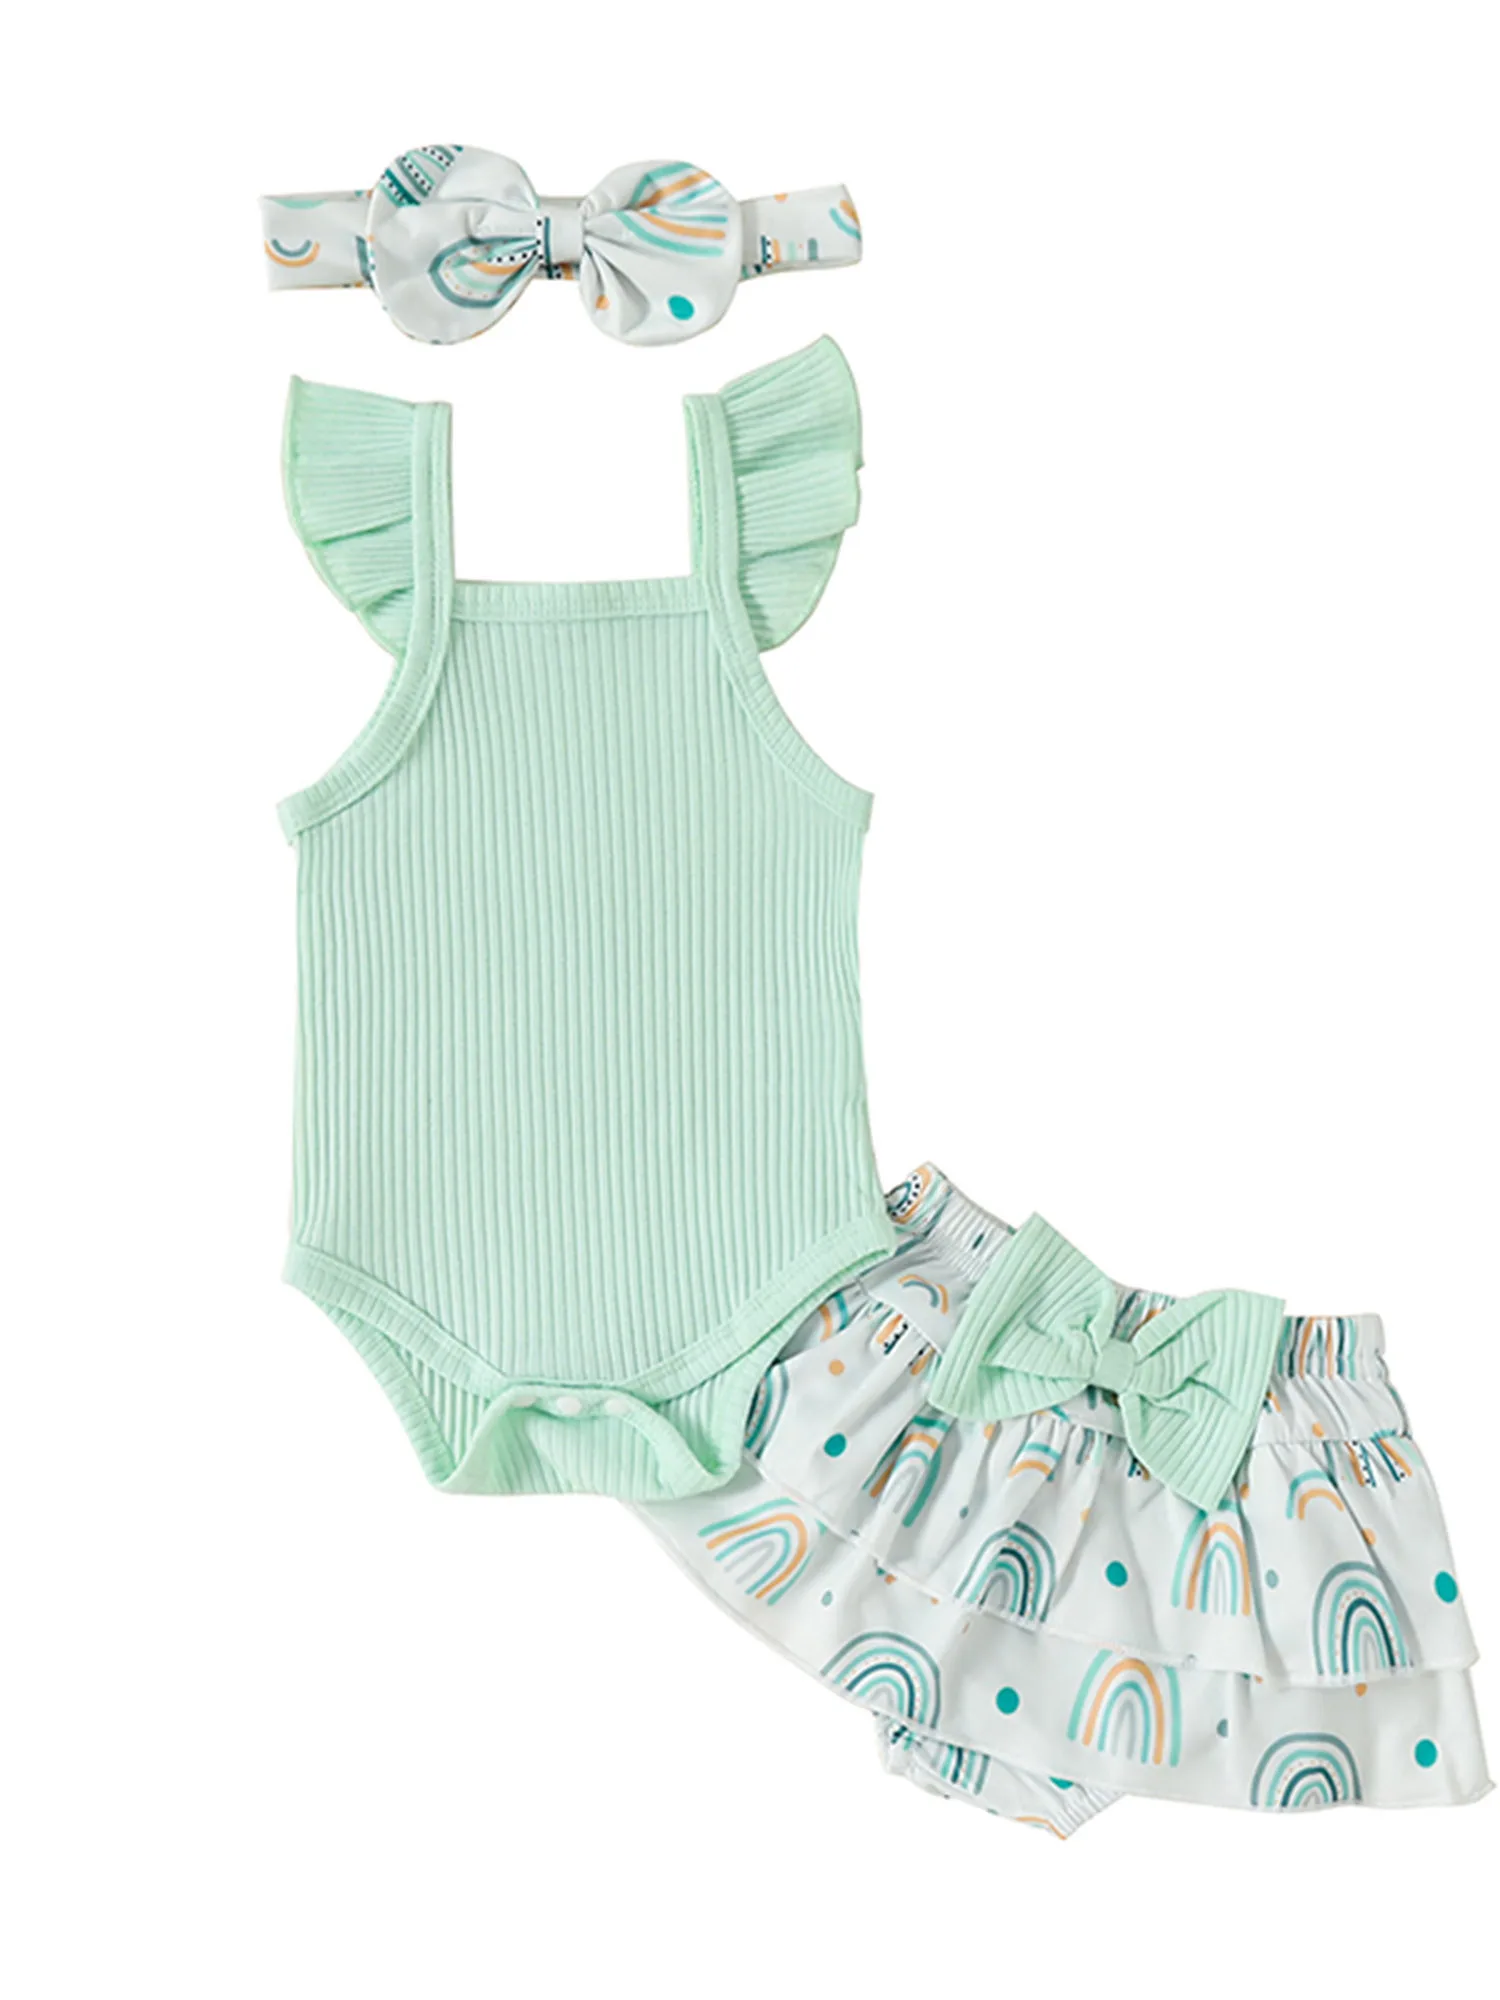 

Adorable Baby Girl Summer Set with Fly Sleeve Romper Rainbow Print Skirt and Bowknot Headband - Perfect Infant Outfit in